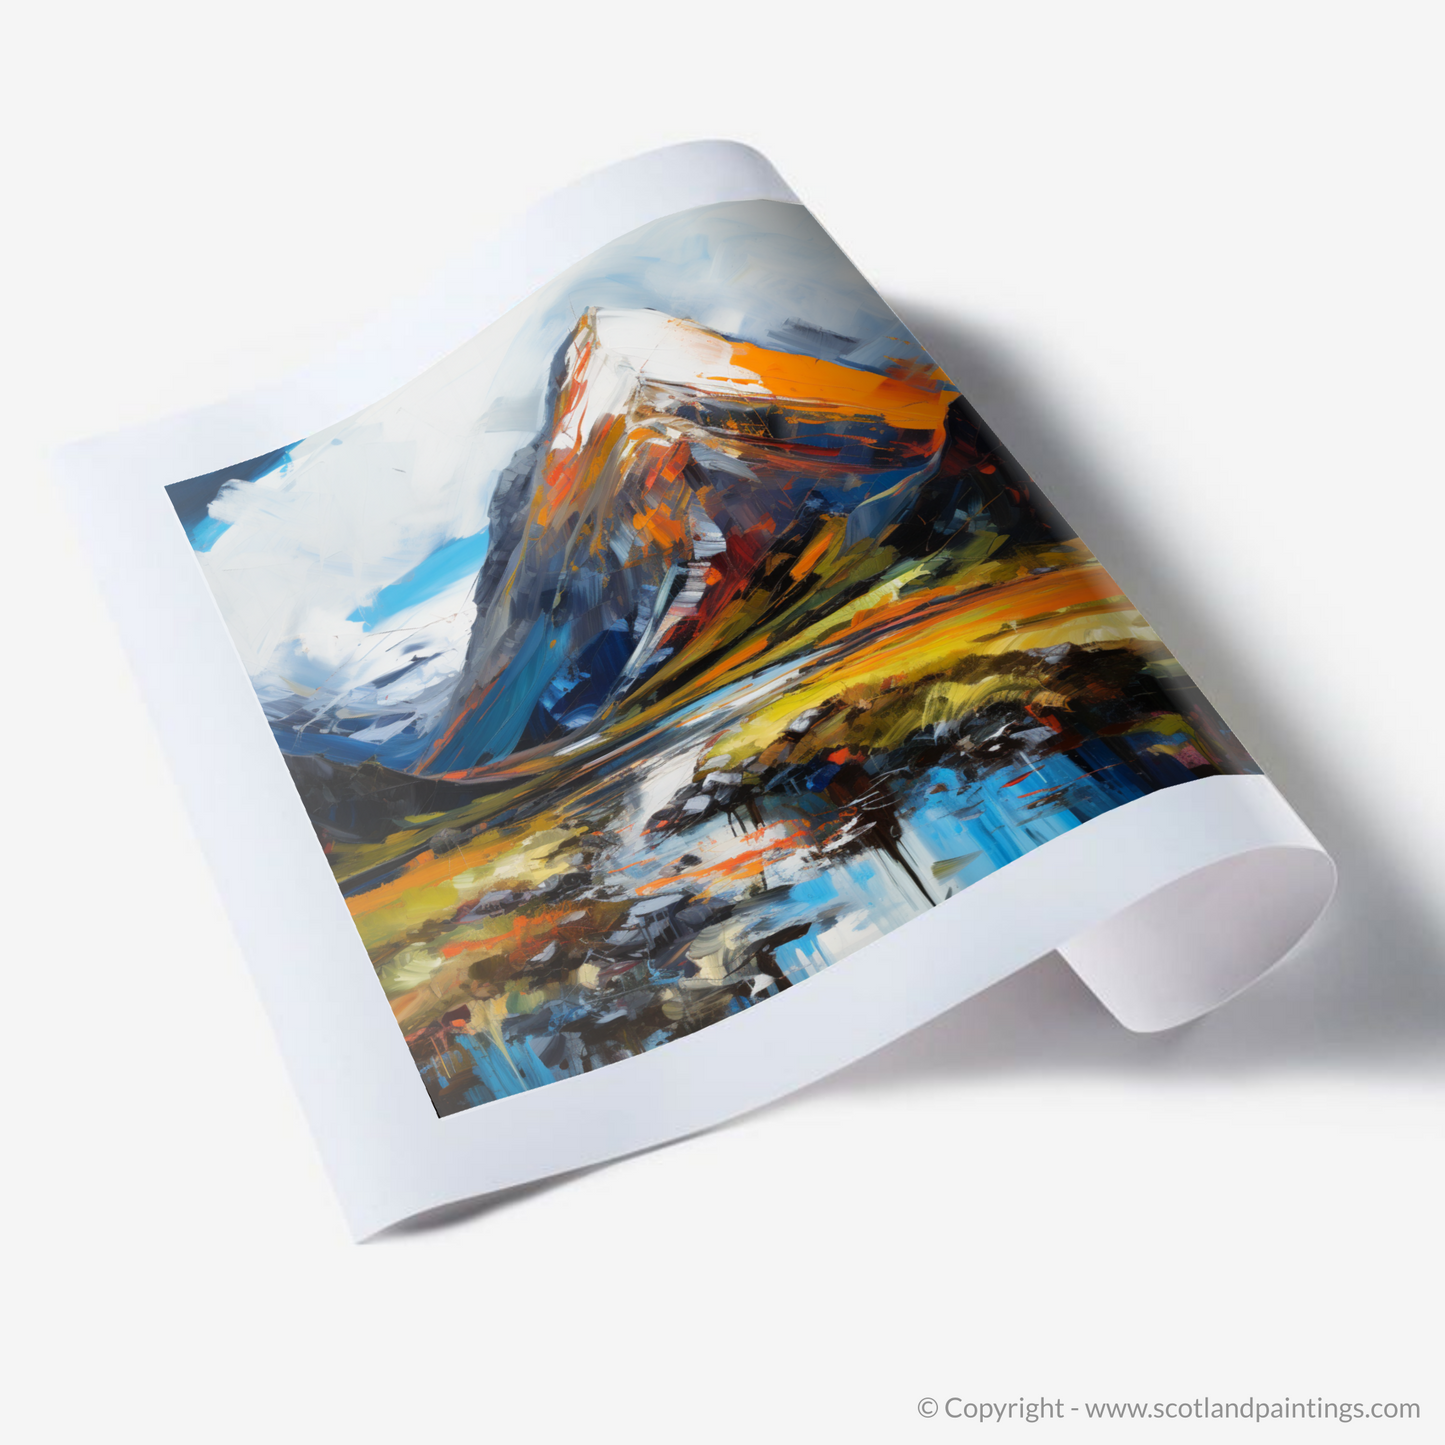 Painting and Art Print of Ben Nevis. Majestic Ben Nevis: An Expressionist Homage to Scotland's Highest Peak.